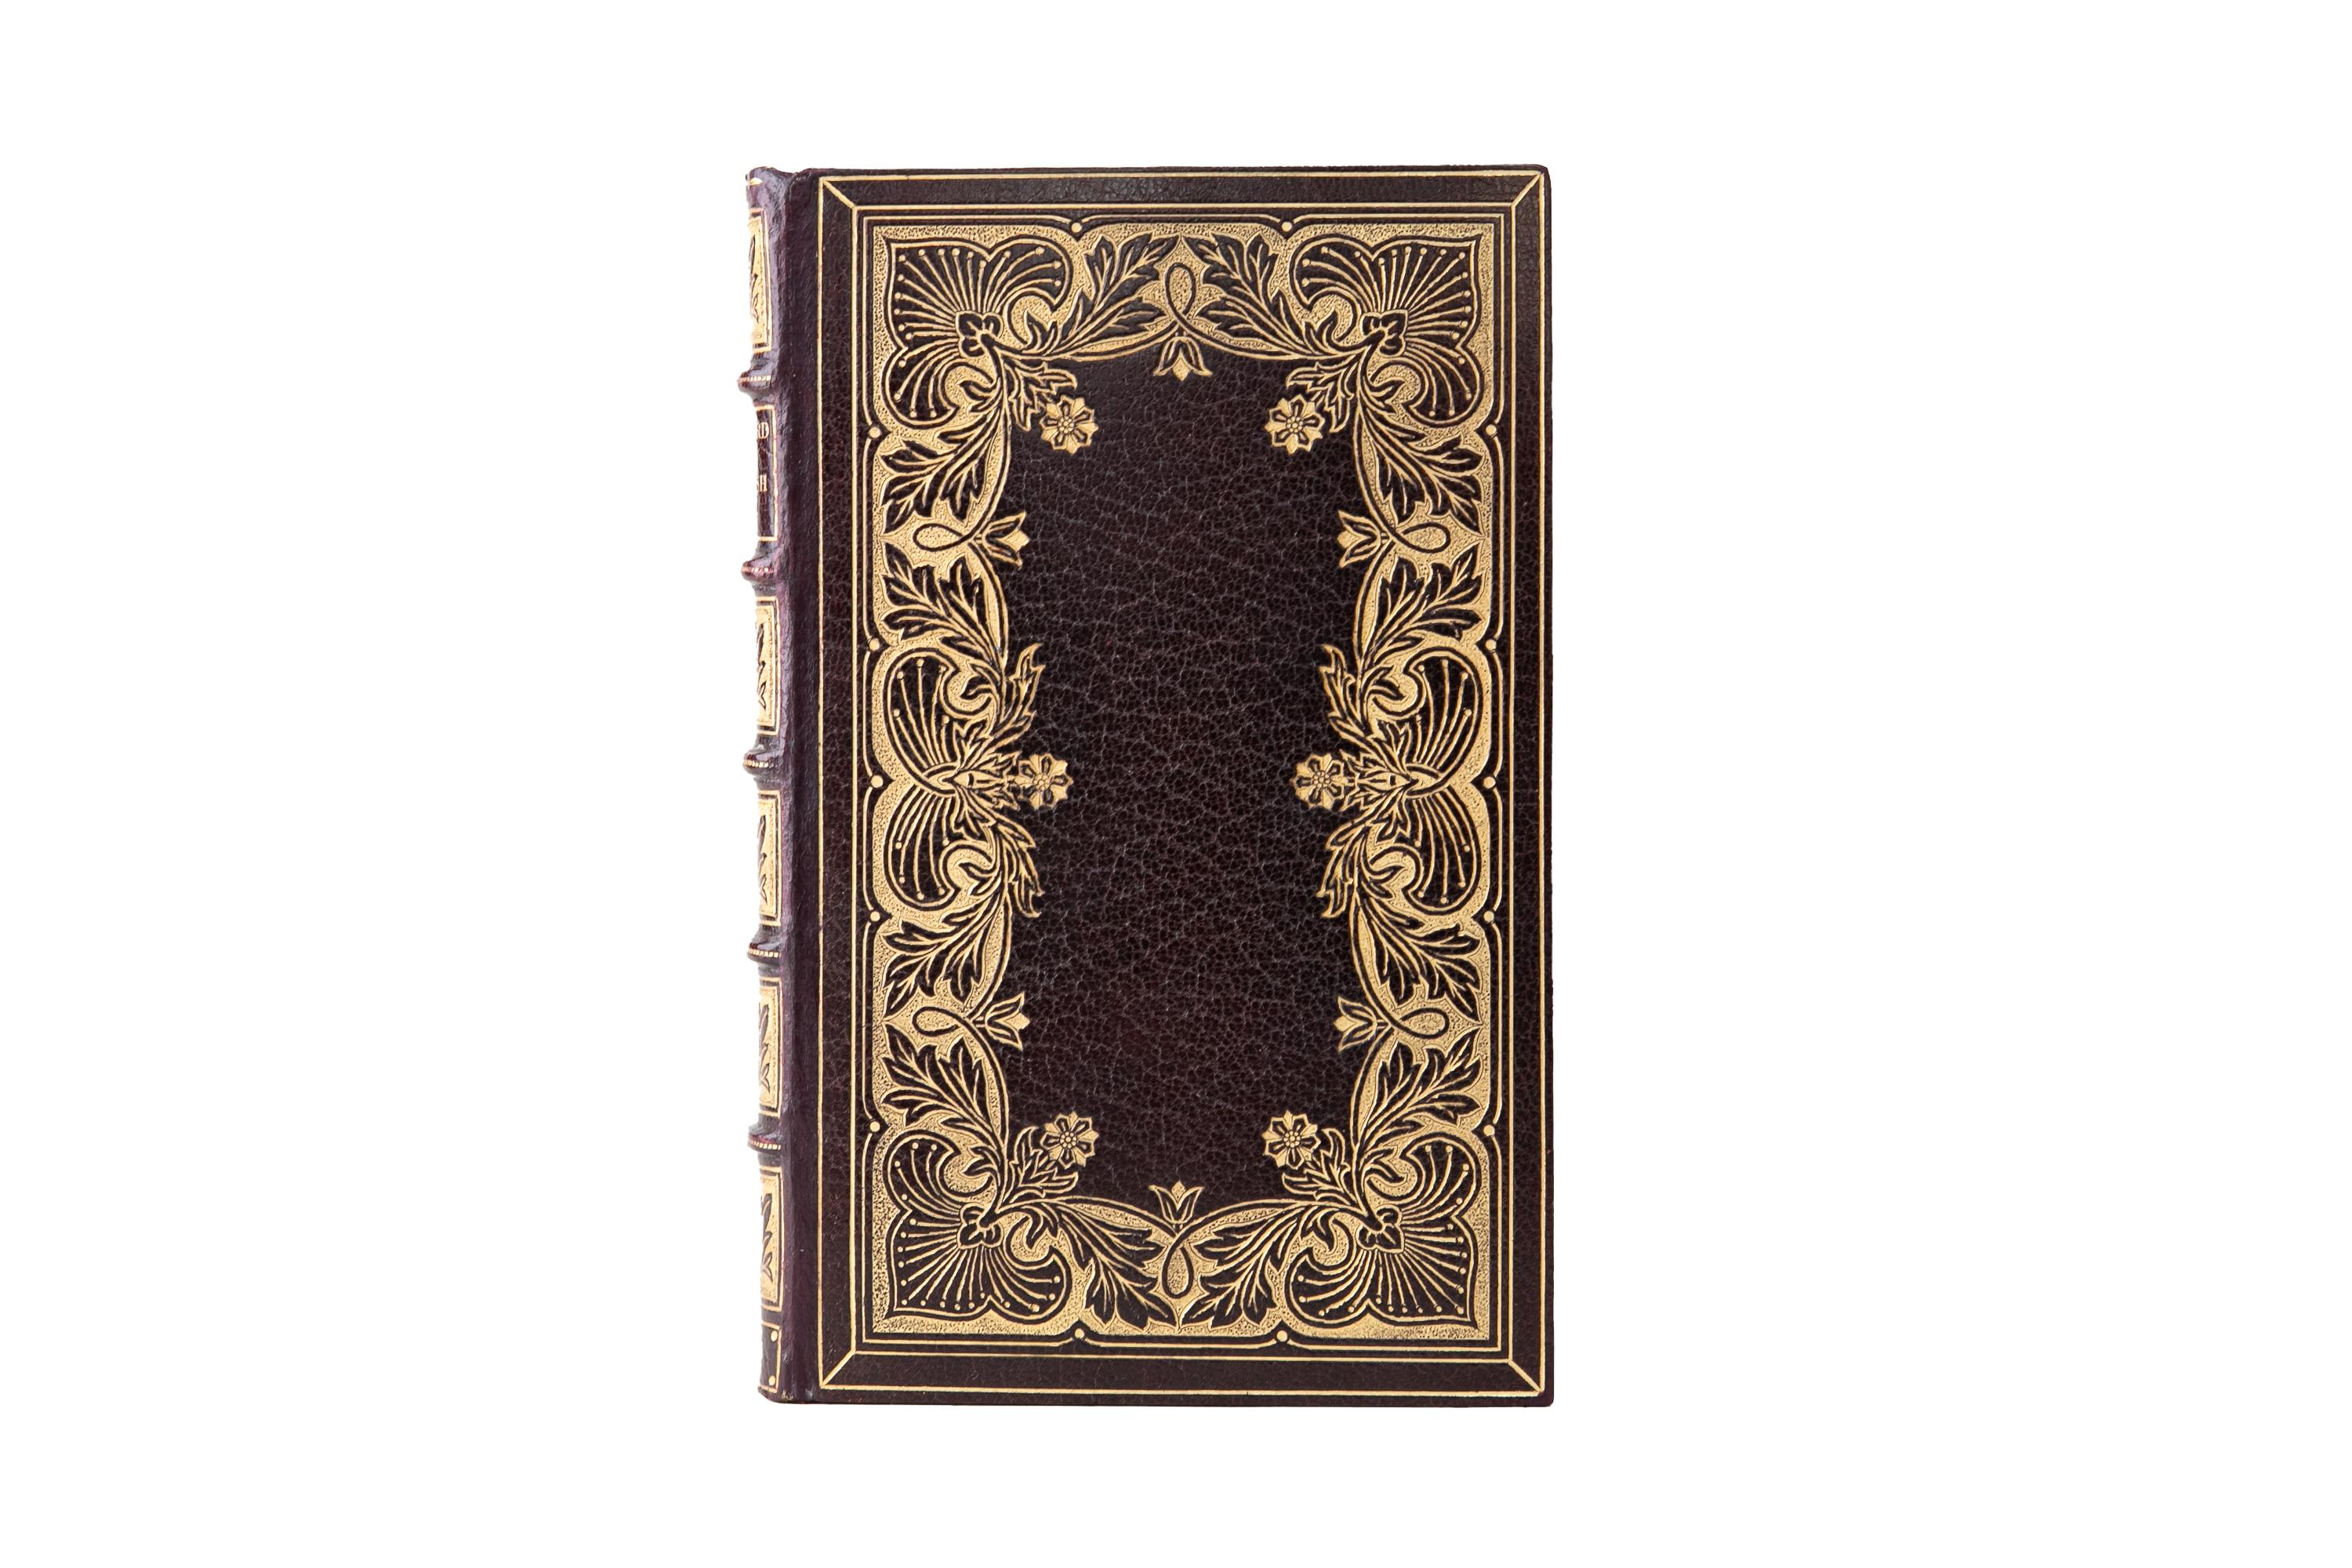 1 Volume. Sir Arthur Quiller-Couch, The Oxford Book of English Verse. Bound by Riviere in full brown Morocco with the covers and raised band spines gilt-tooled. All edges are gilt with gilt-tooled dentelles. English verse from 1250-1900. Oxford: The